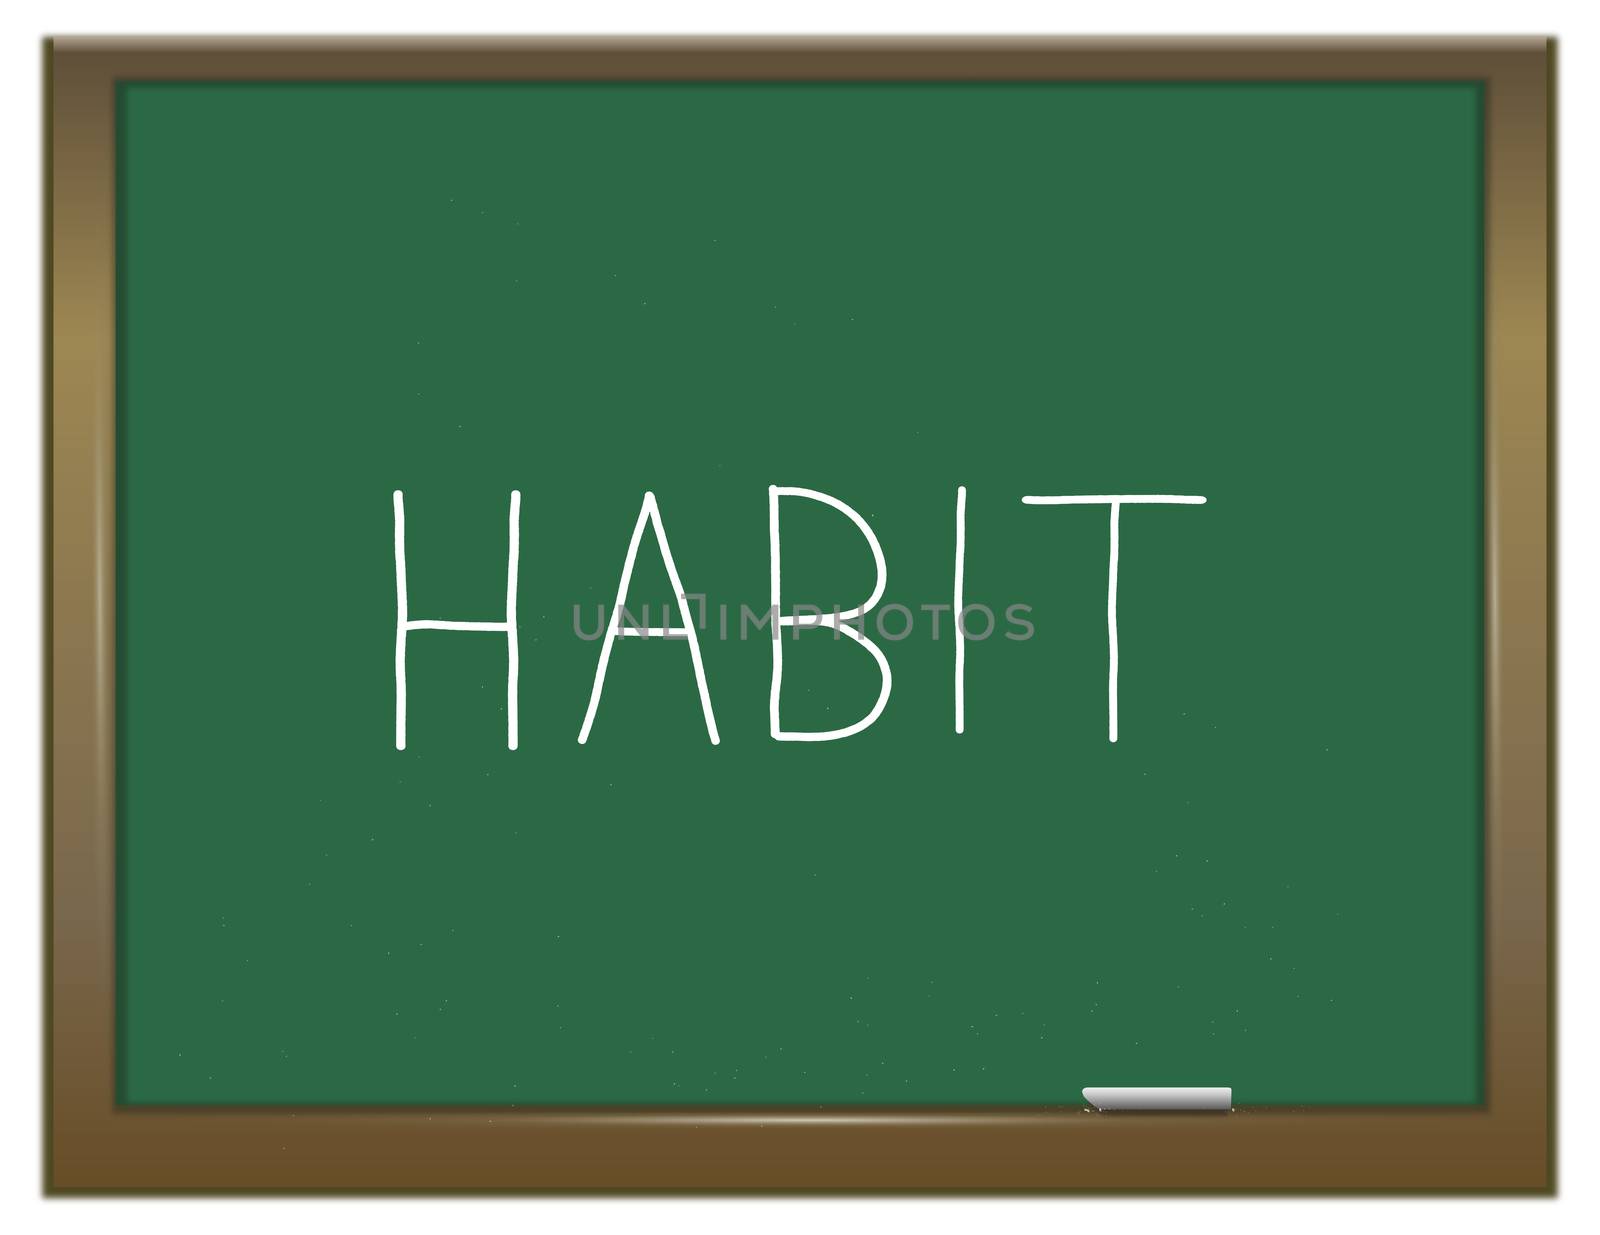 Illustration depicting a green chalkboard with a habit concept.